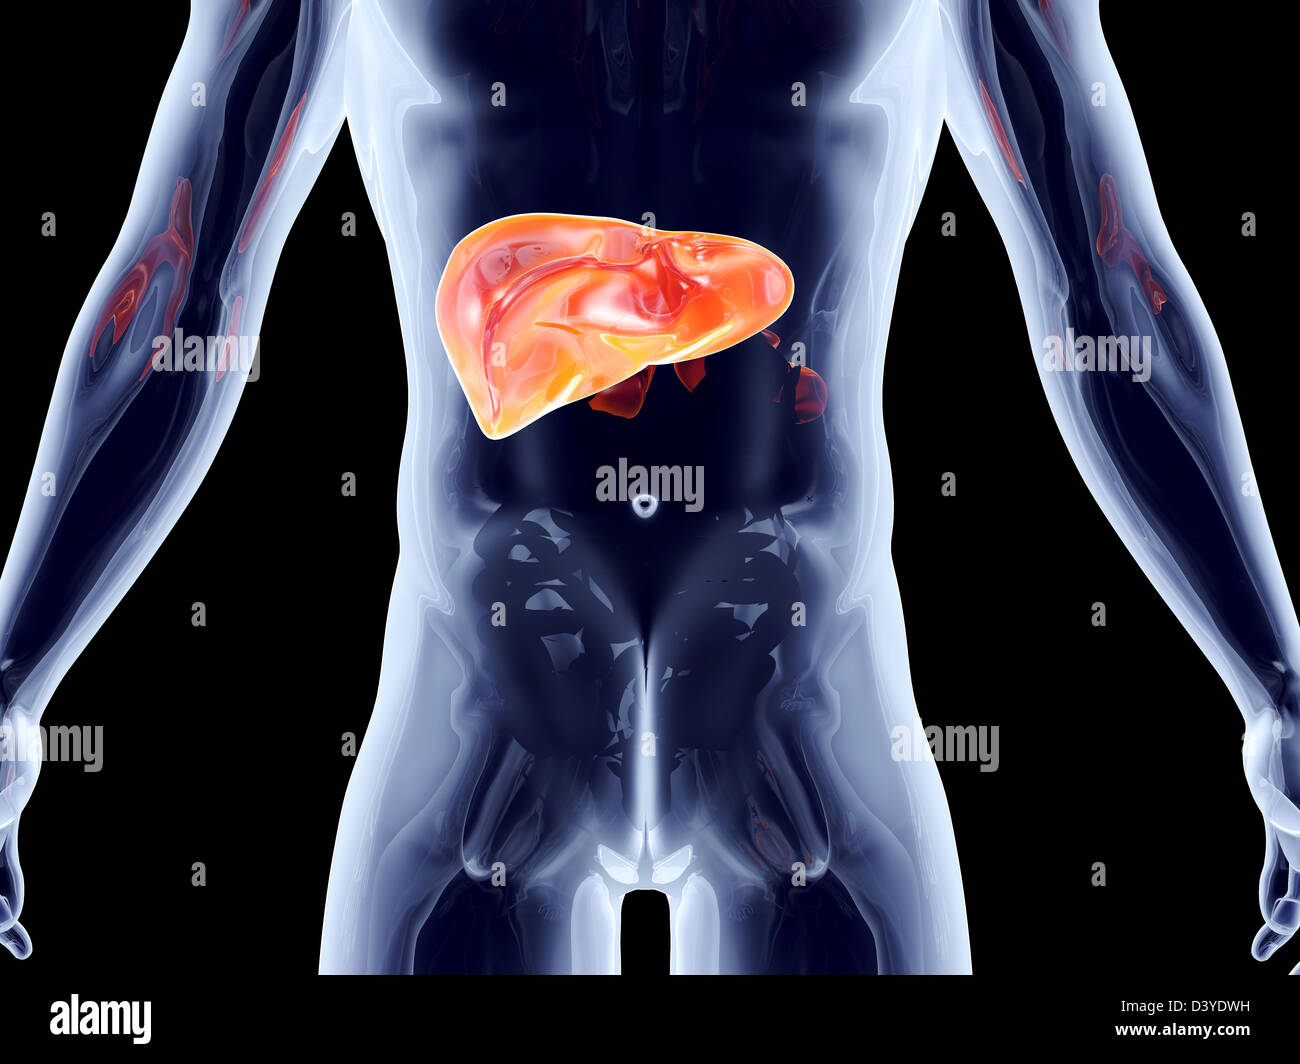 The Liver. 3D rendered anatomical illustration Stock Photo - Alamy